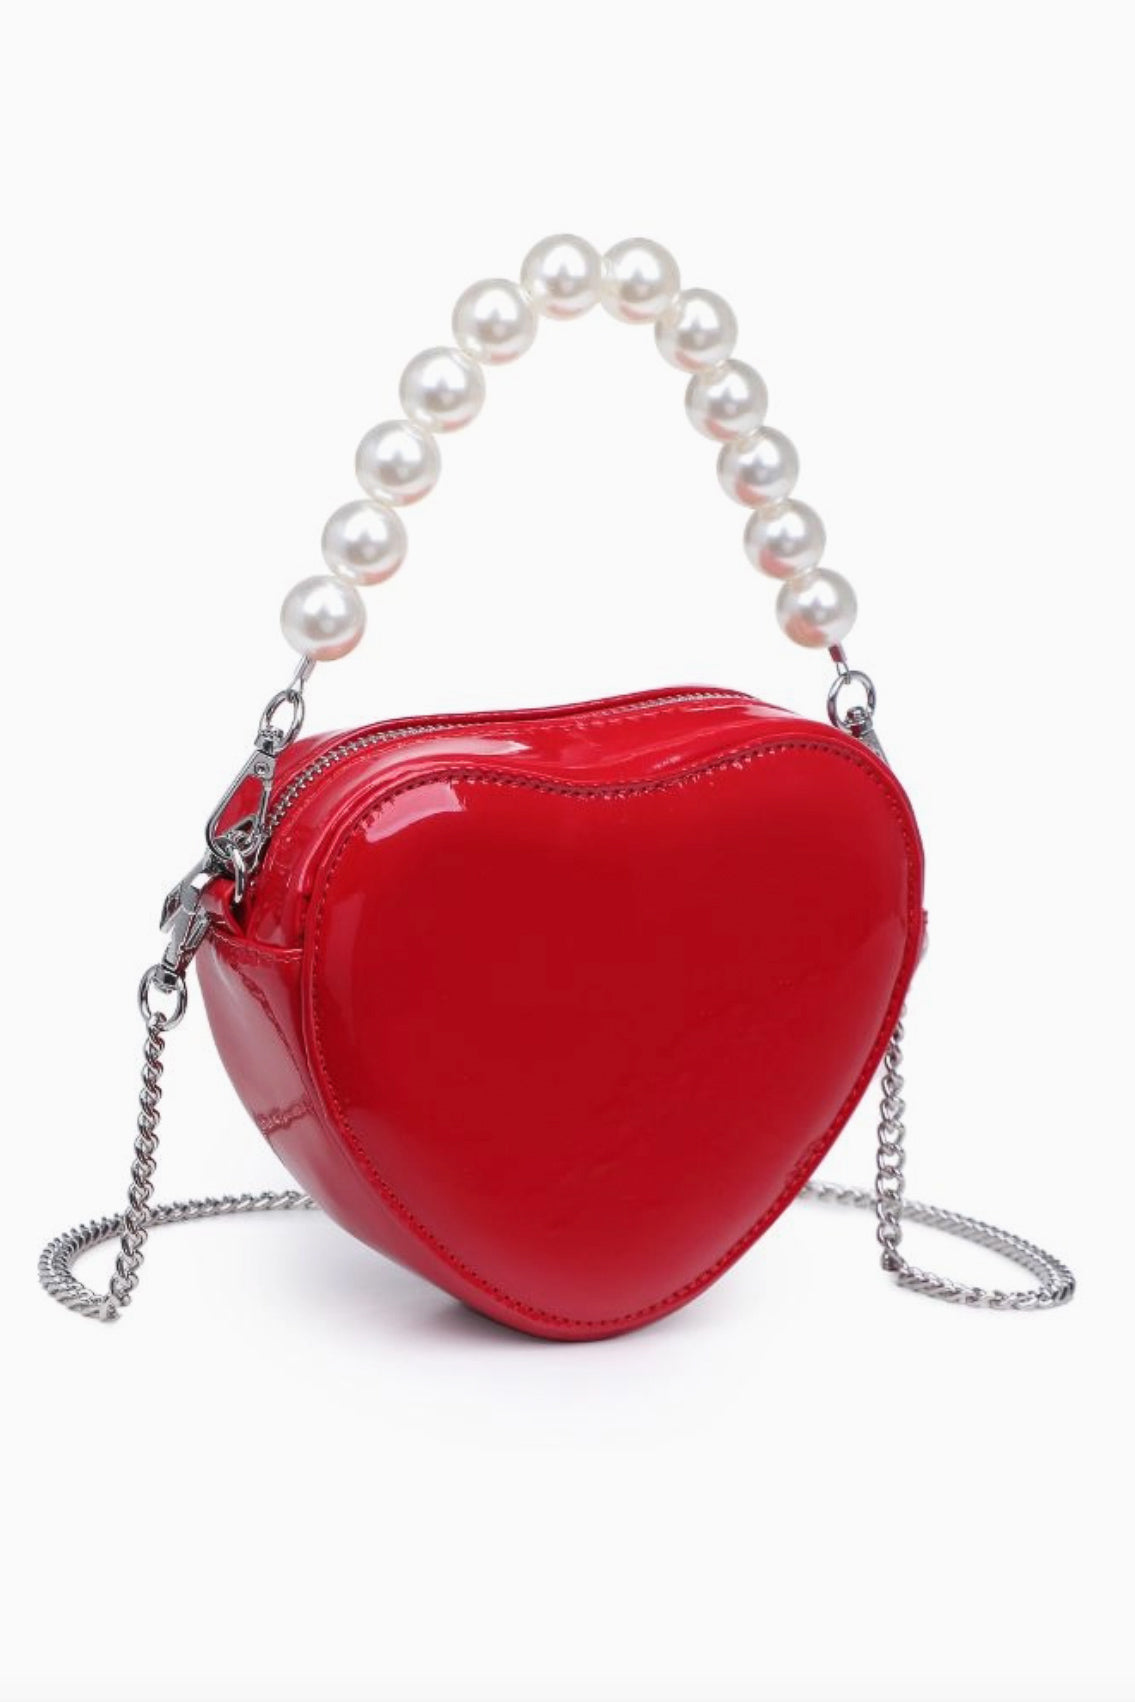 Mi Amore Heart Shaped Bag - Red